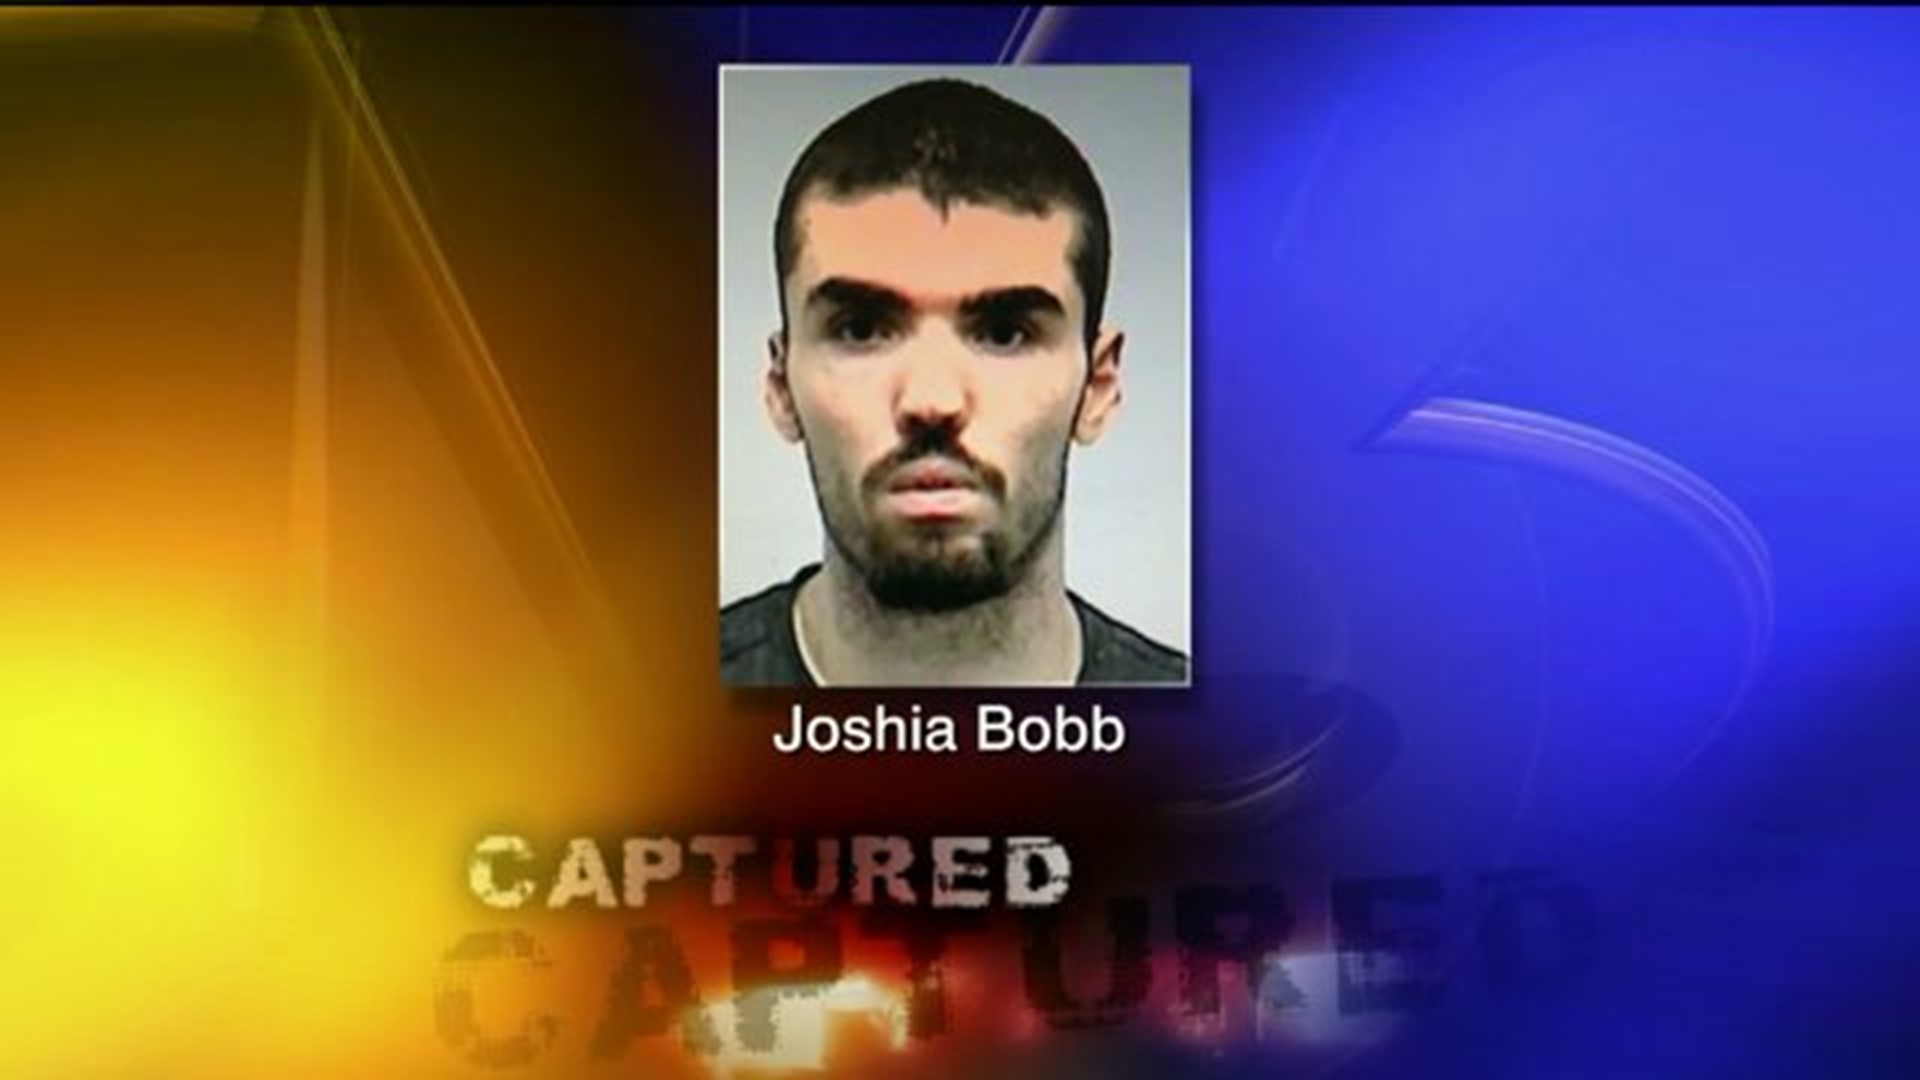 Man Wanted on Child Rape Charges Captured